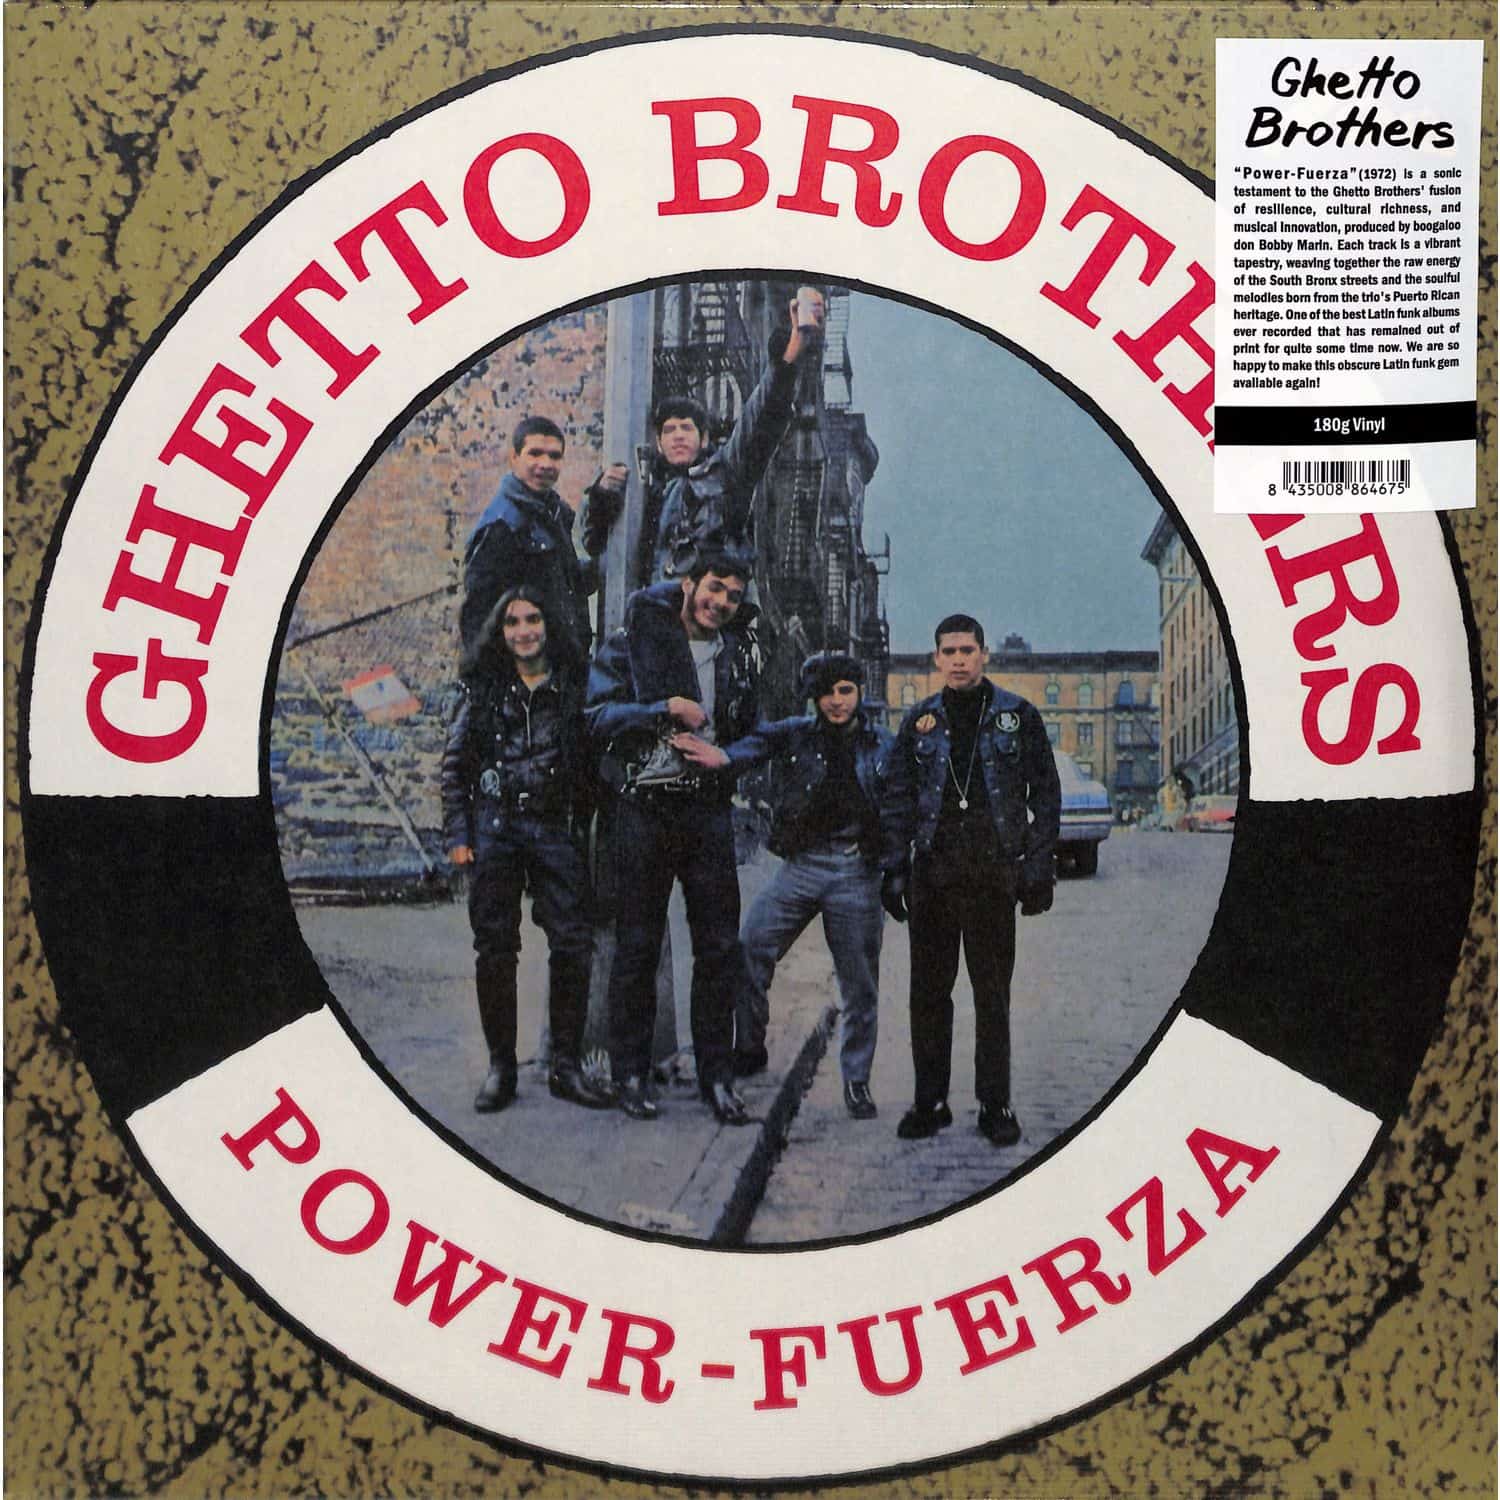 Ghetto Brothers - POWER-FUERZA 